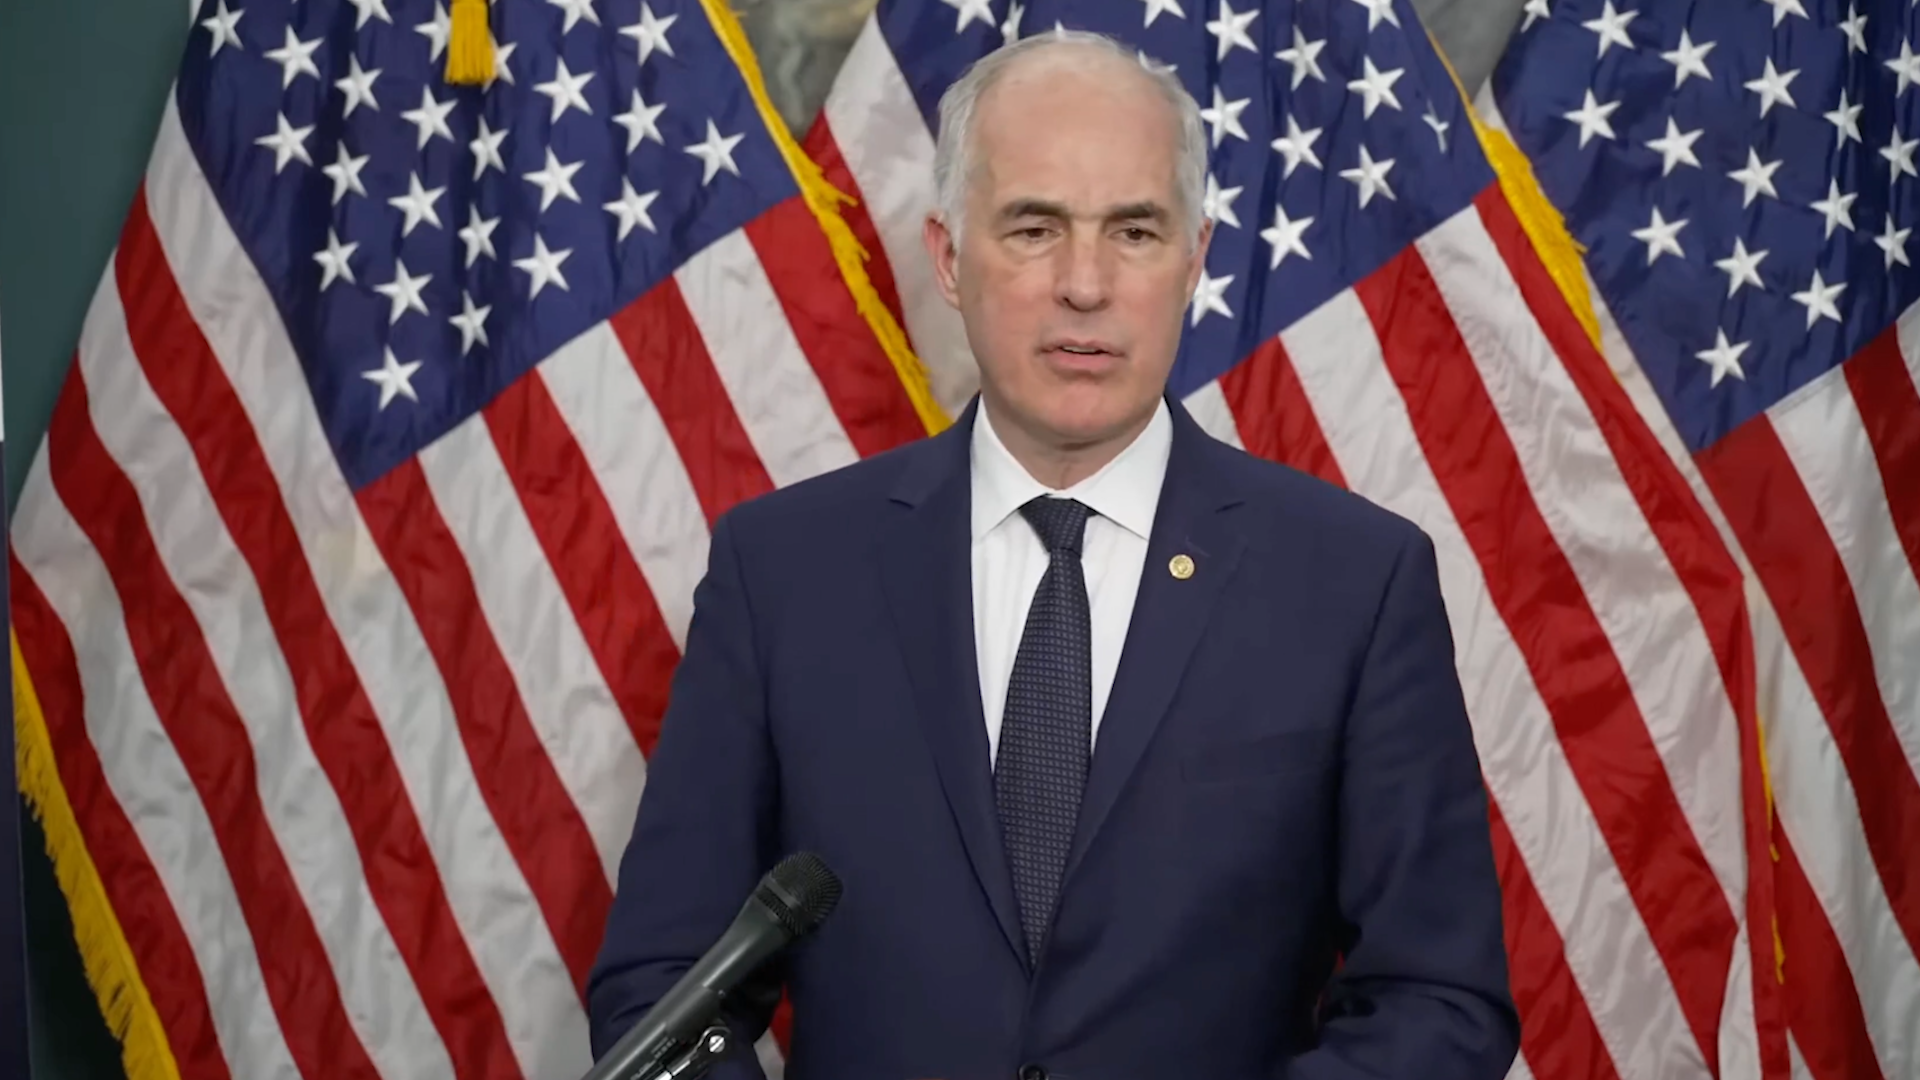 Senators Casey, Baldwin Join USW to Fight “Unfair Chinese Trade Practices” in Shipbuilding